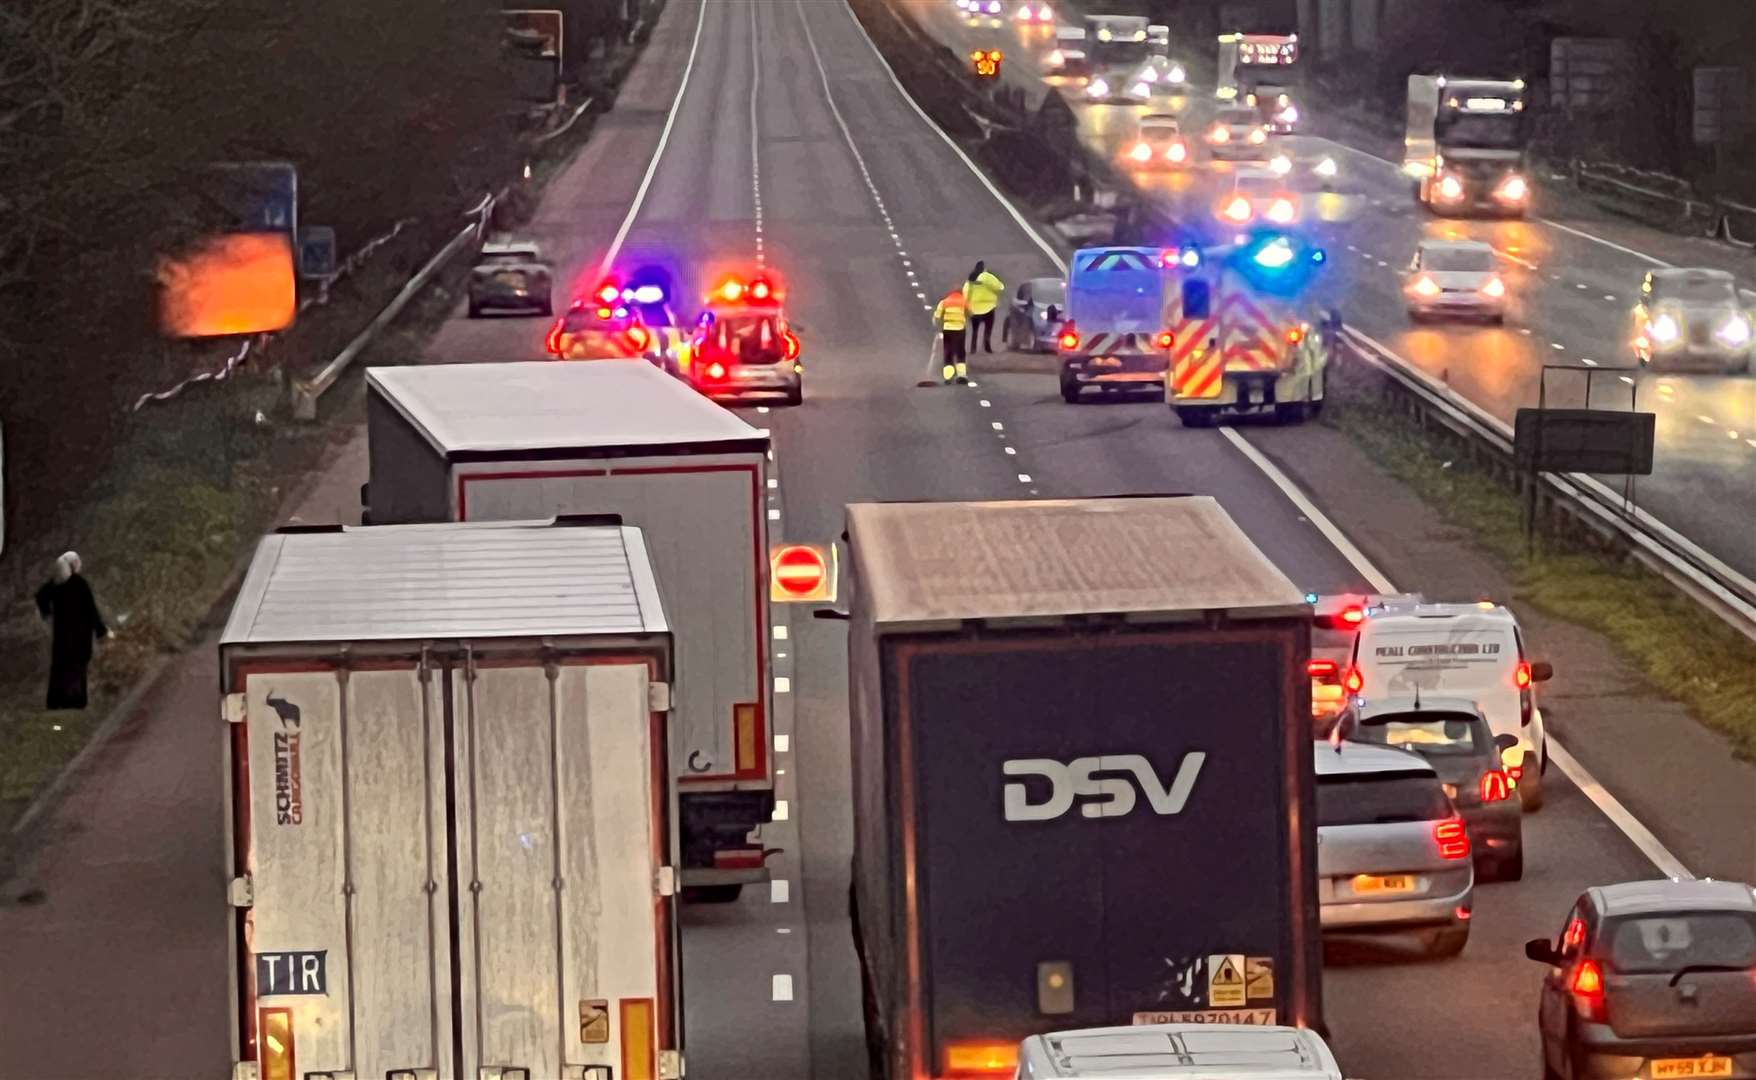 A crash involving two vehicles has closed the M20 in Ashford./ppPicture: Steve Salter